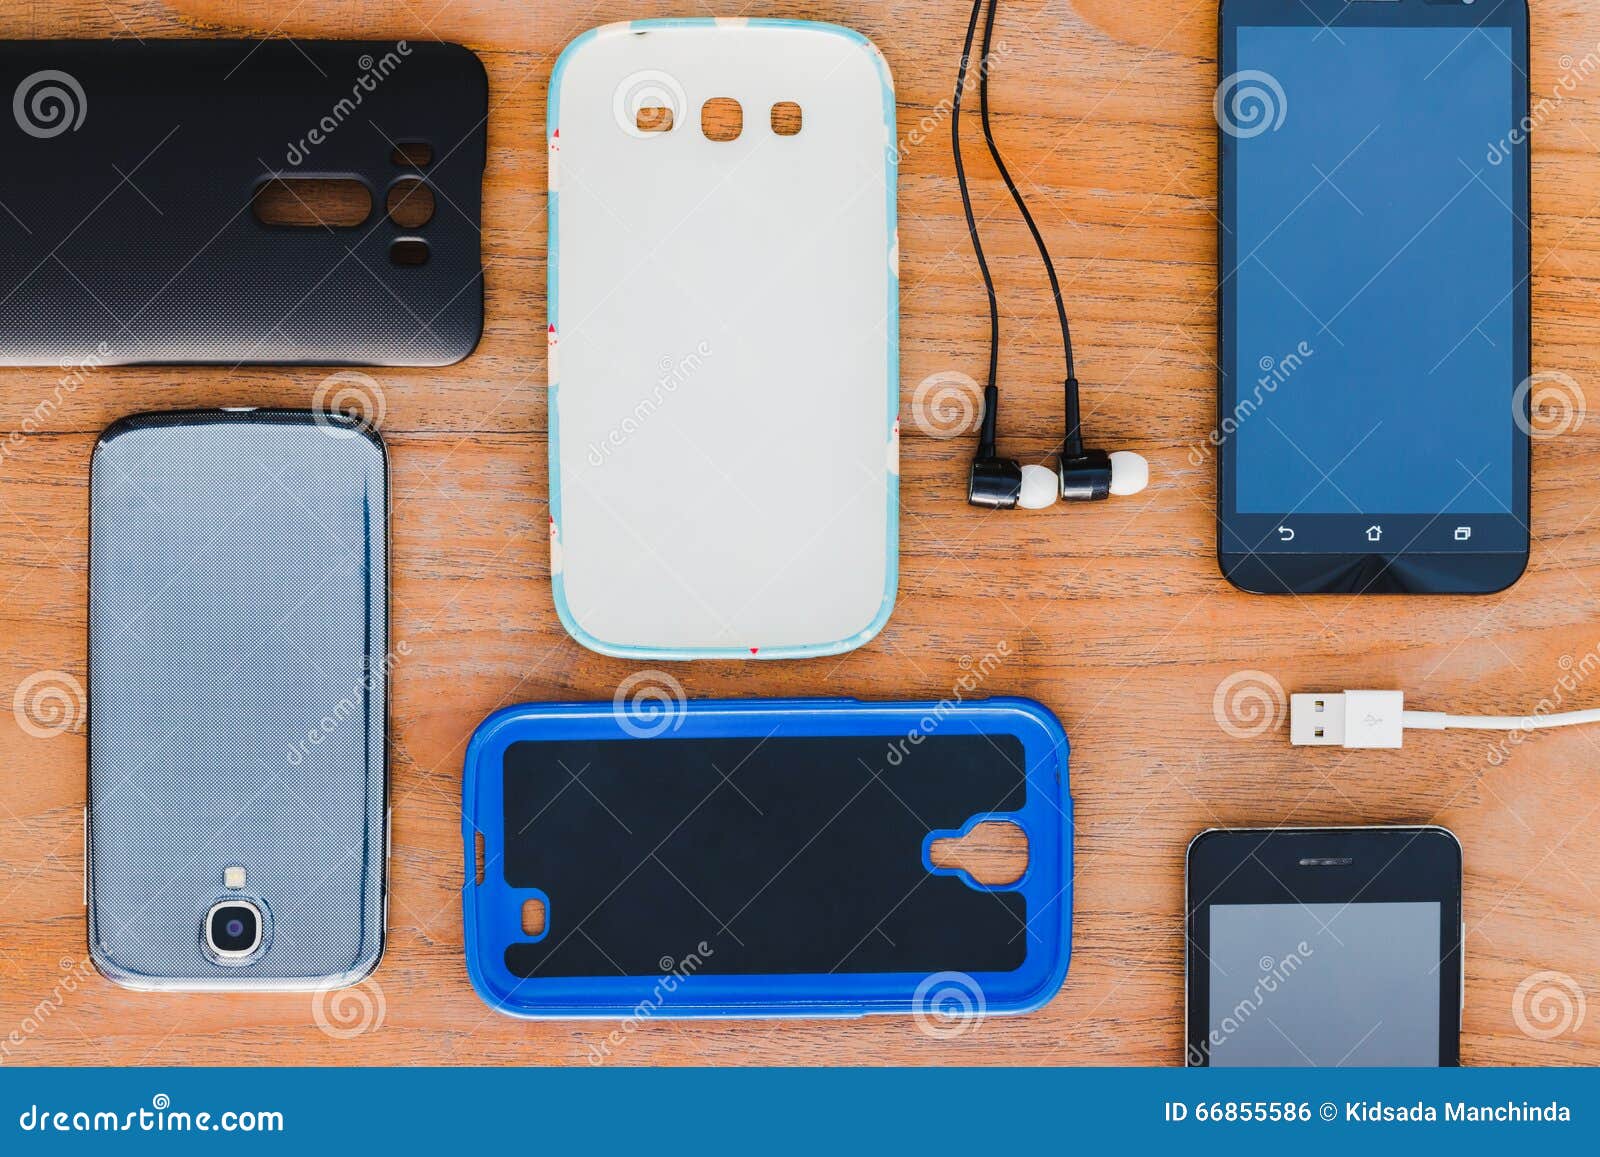 cell phone and accessories